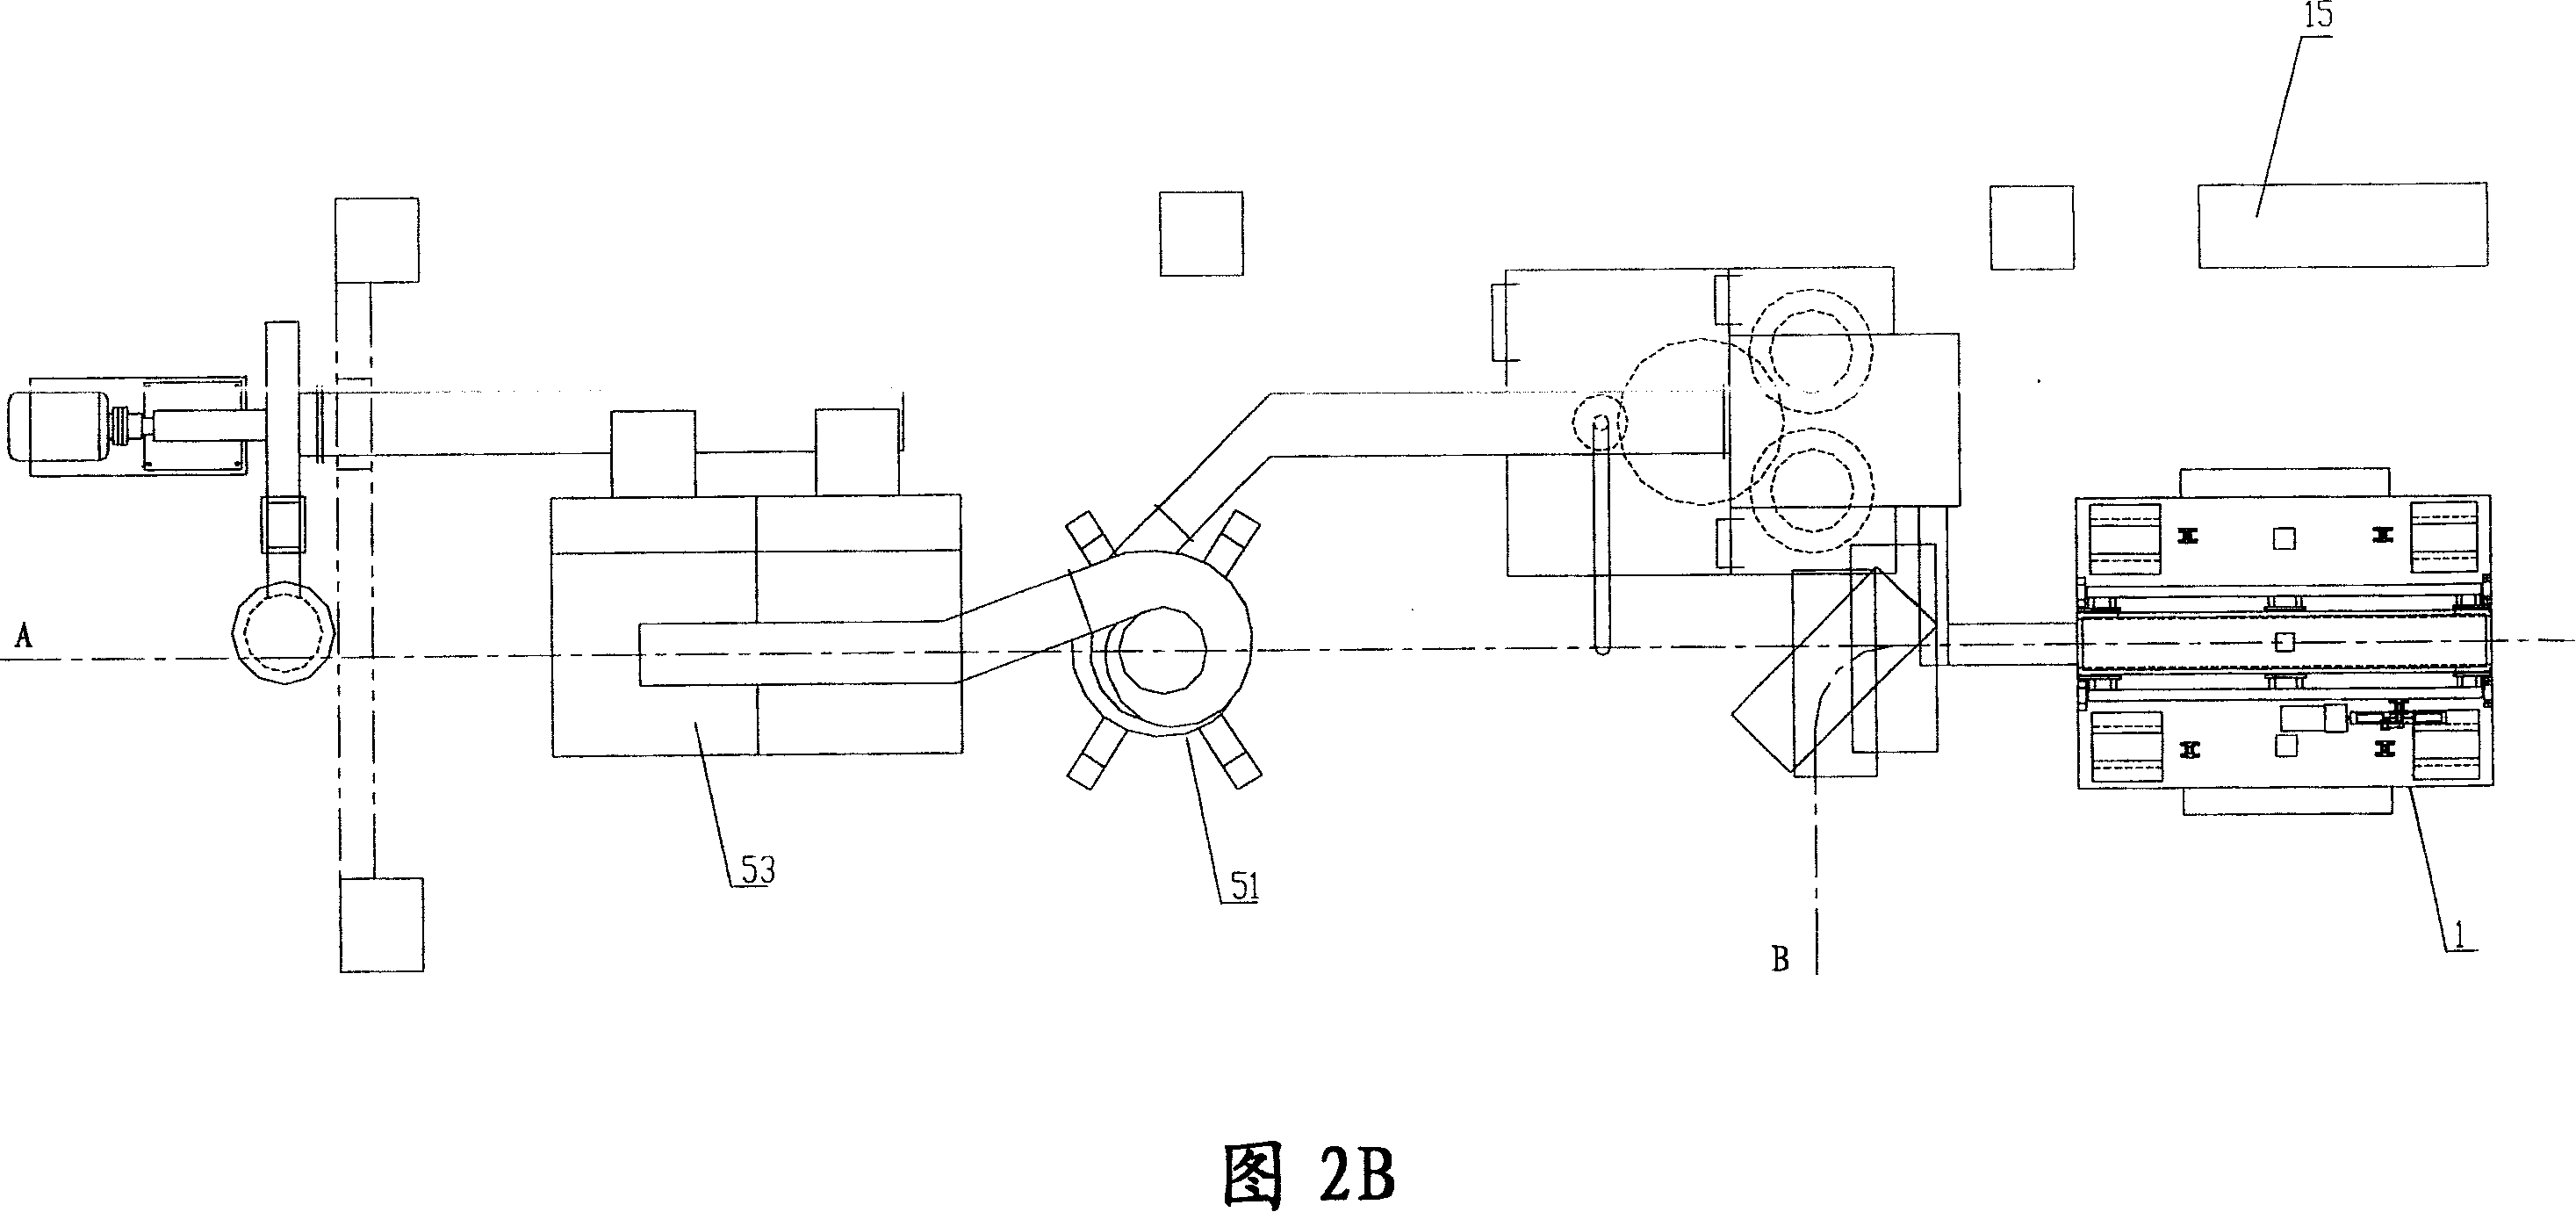 Aluminium plant electrolytic carbon residual anode surface pellet injecting and sandblast cleaning system and method